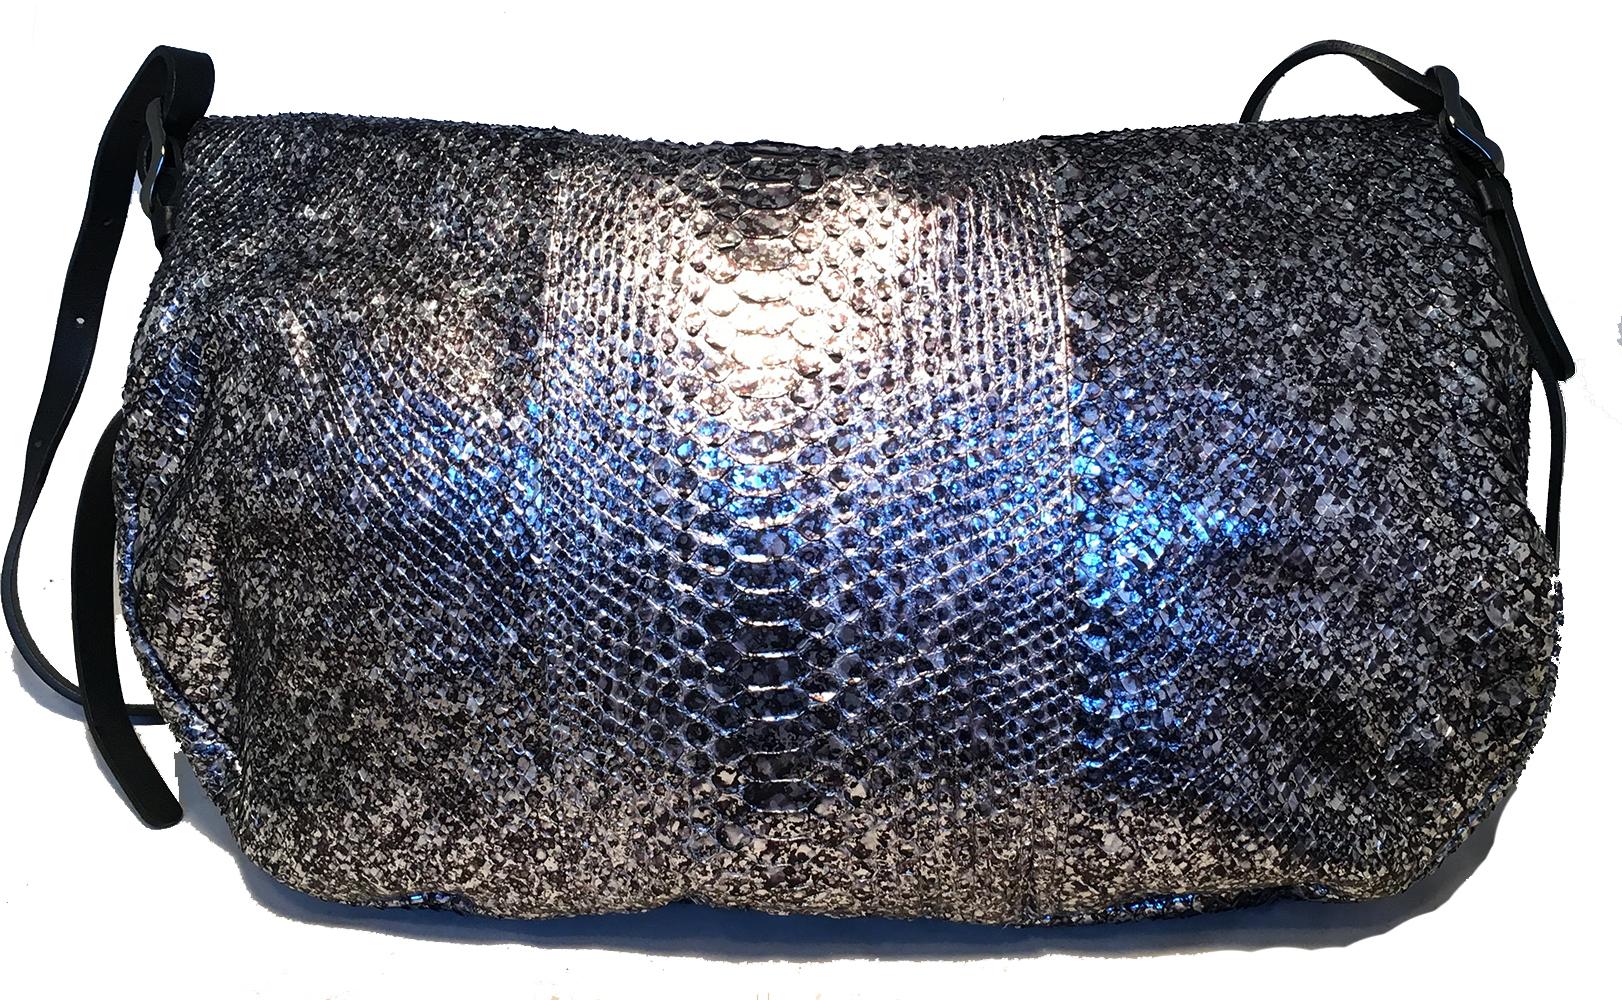 Jimmy Choo Silver Snakeskin Python Boho Biker Hobo Charm Shoulder Bag in excellent condition. Gorgeous silver python snakeskin exterior trimmed with black leather and gunmetal hardware. Unique fold over design with two separate storage compartments.